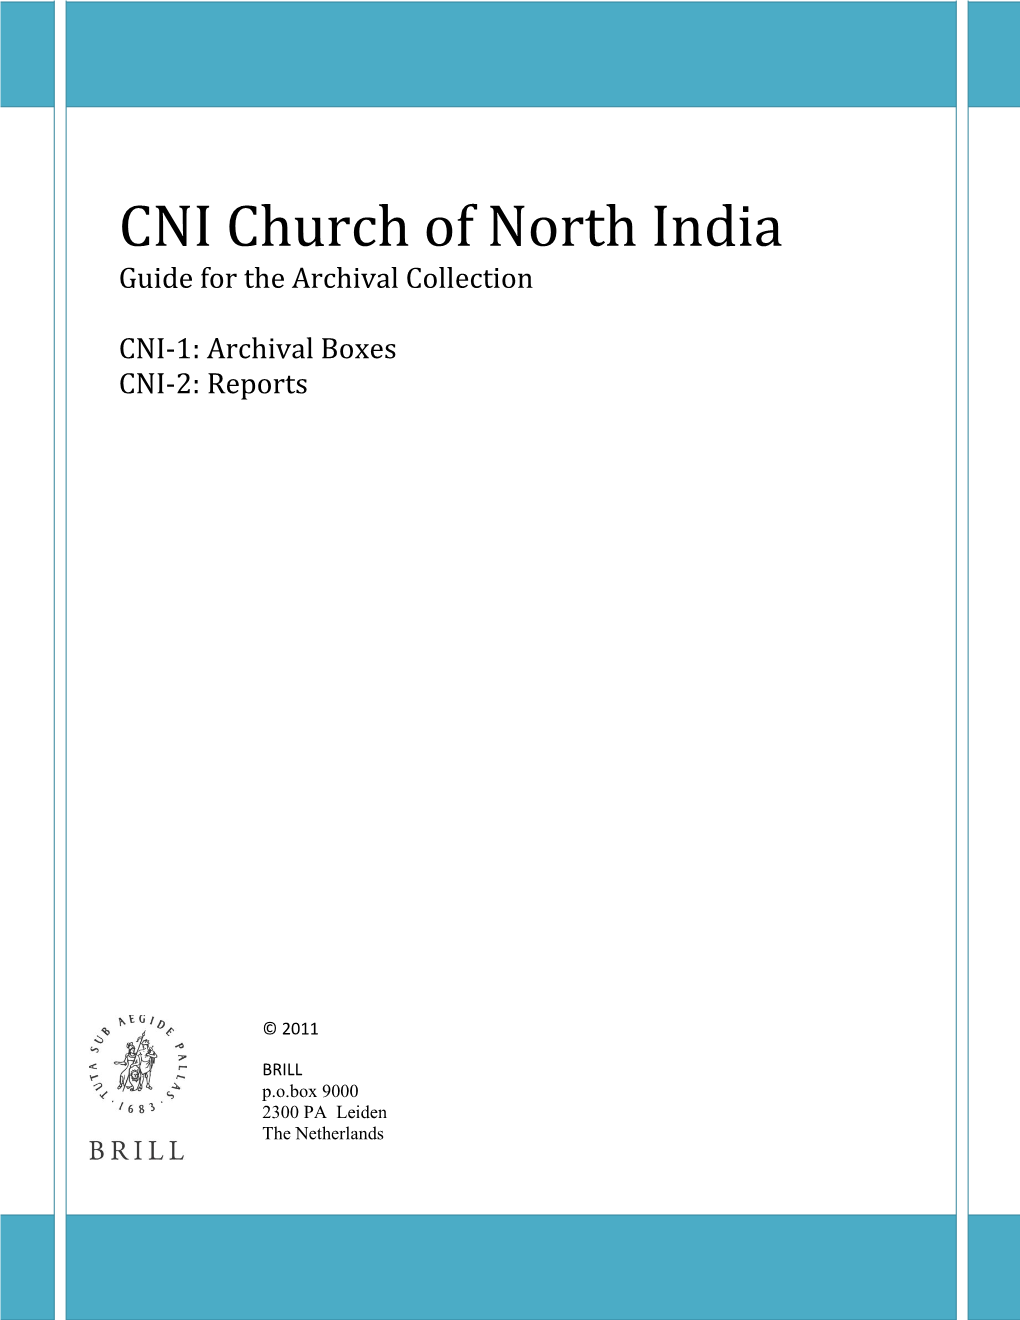 CNI Church of North India Guide for the Archival Collection